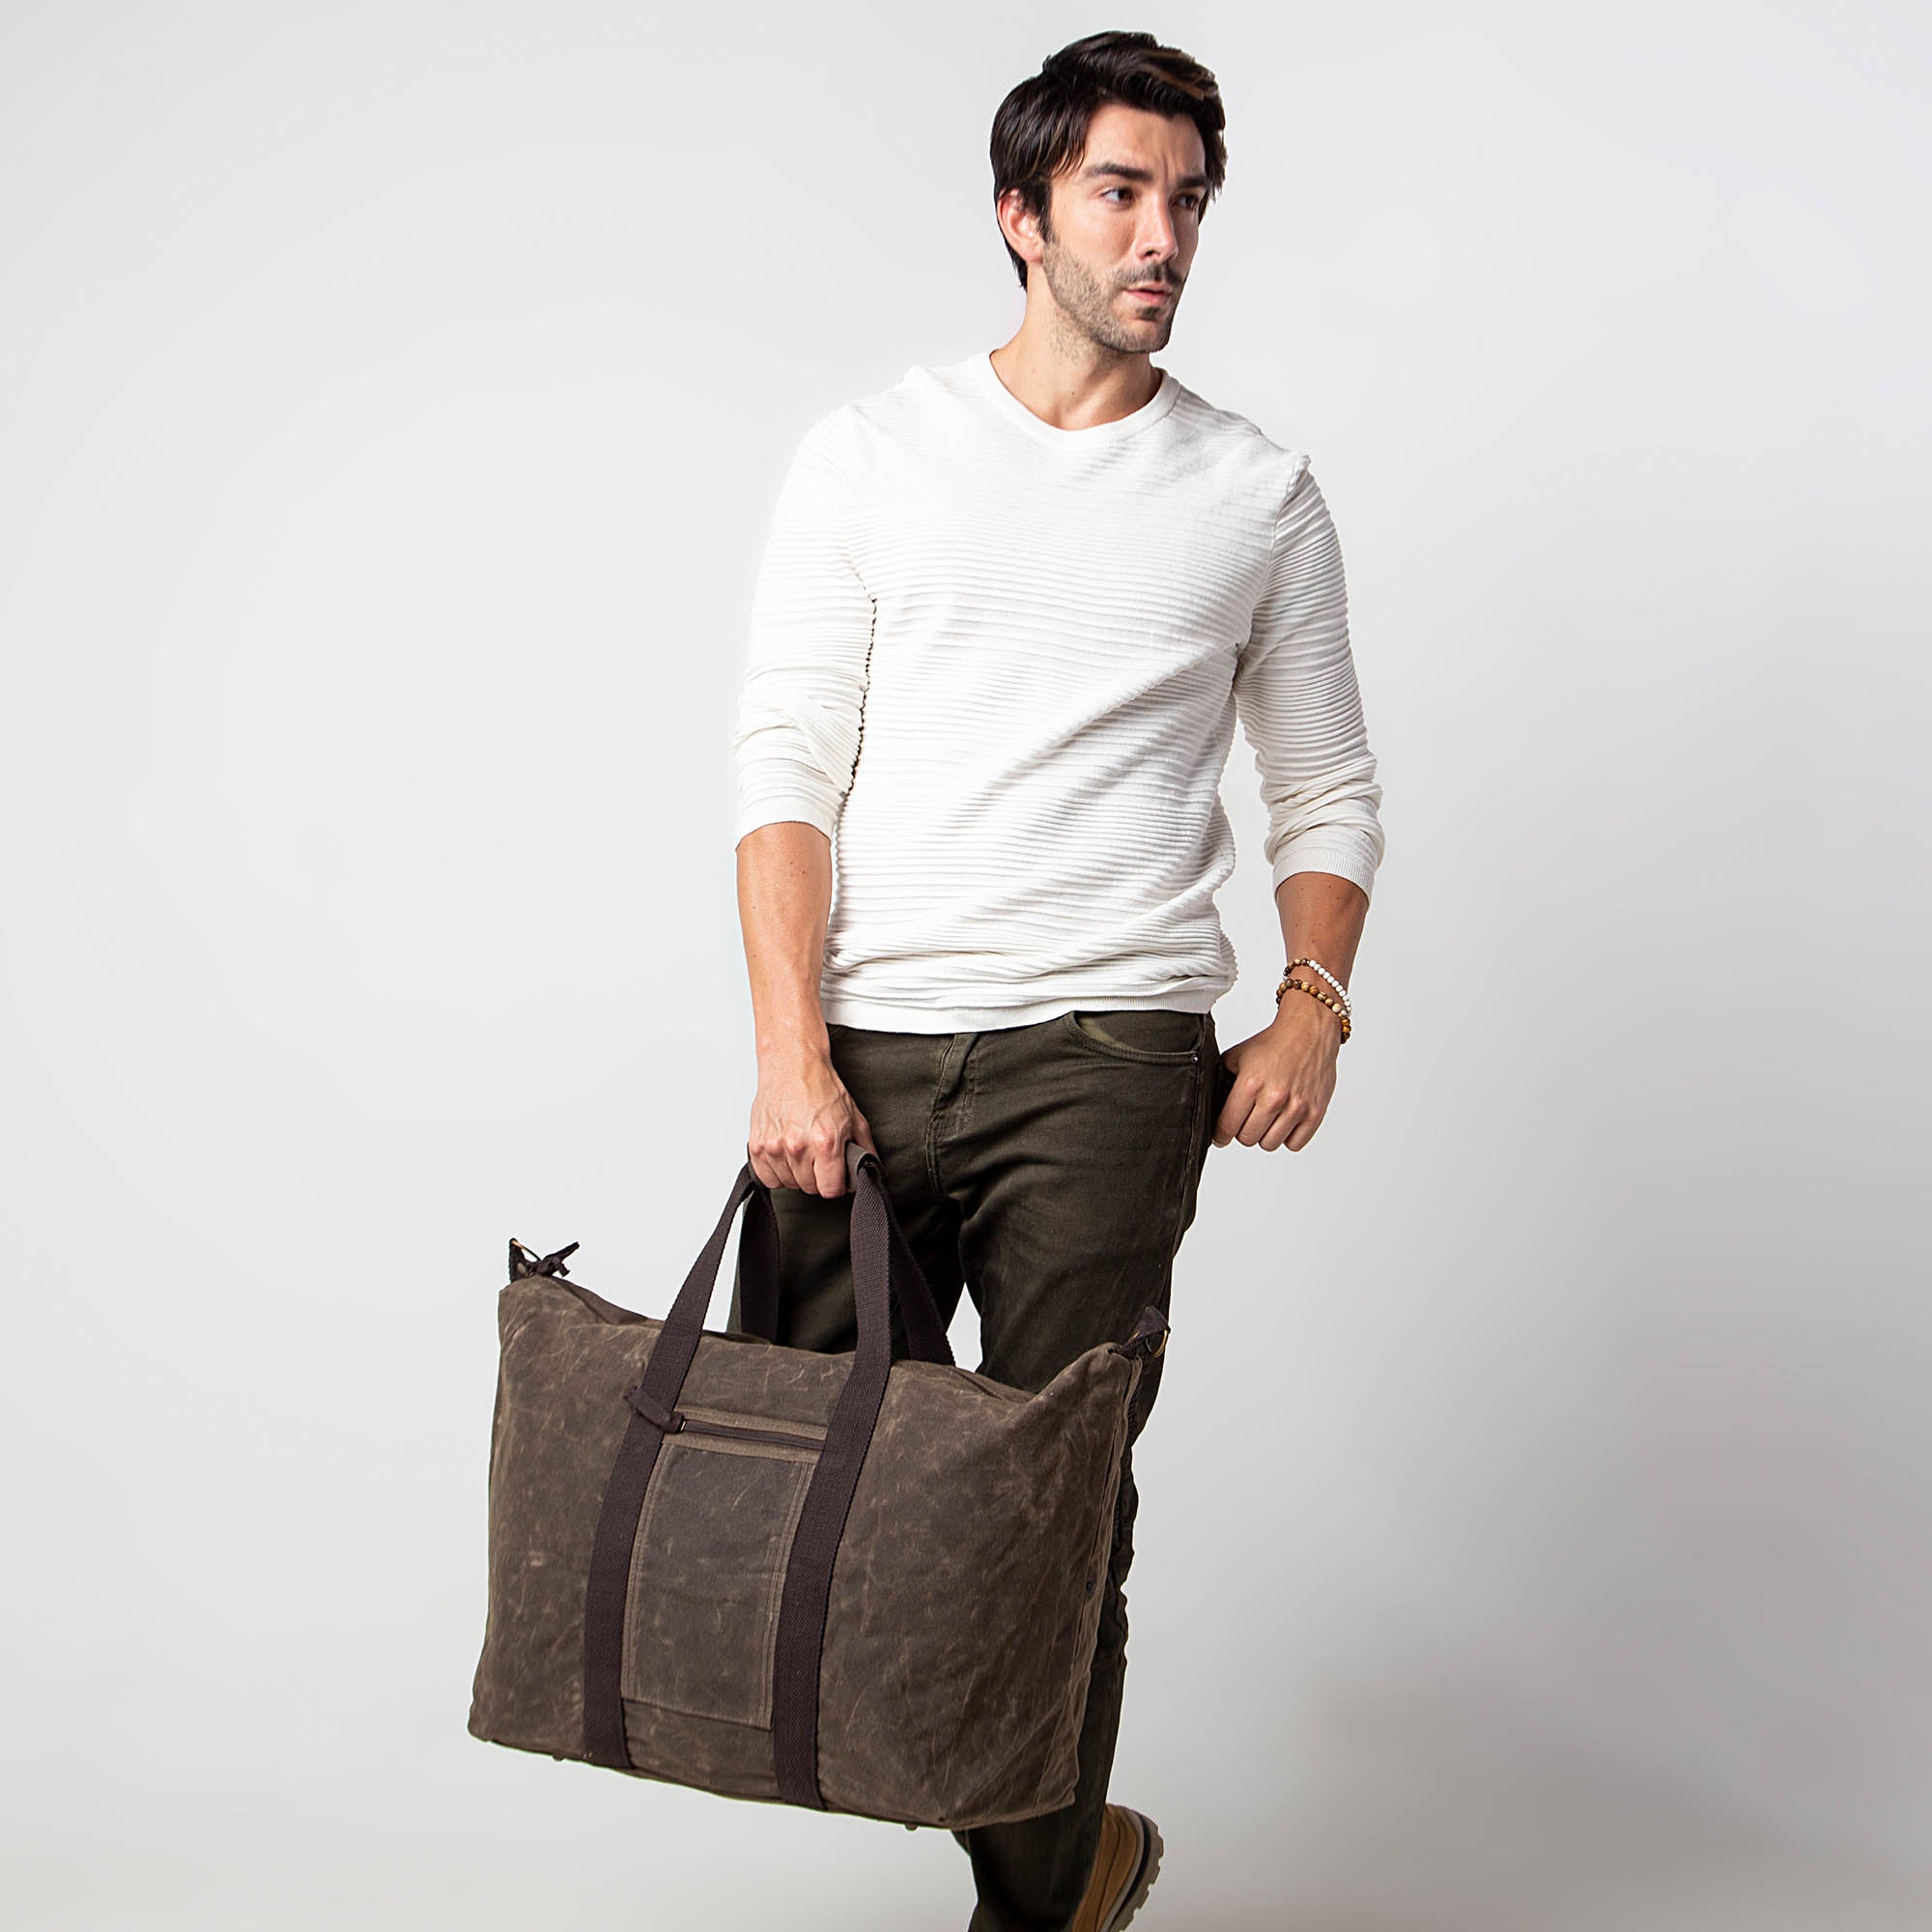 Personalized Mens Duffle Bag - Waxed Canvas - Weekender Large Travel B ...